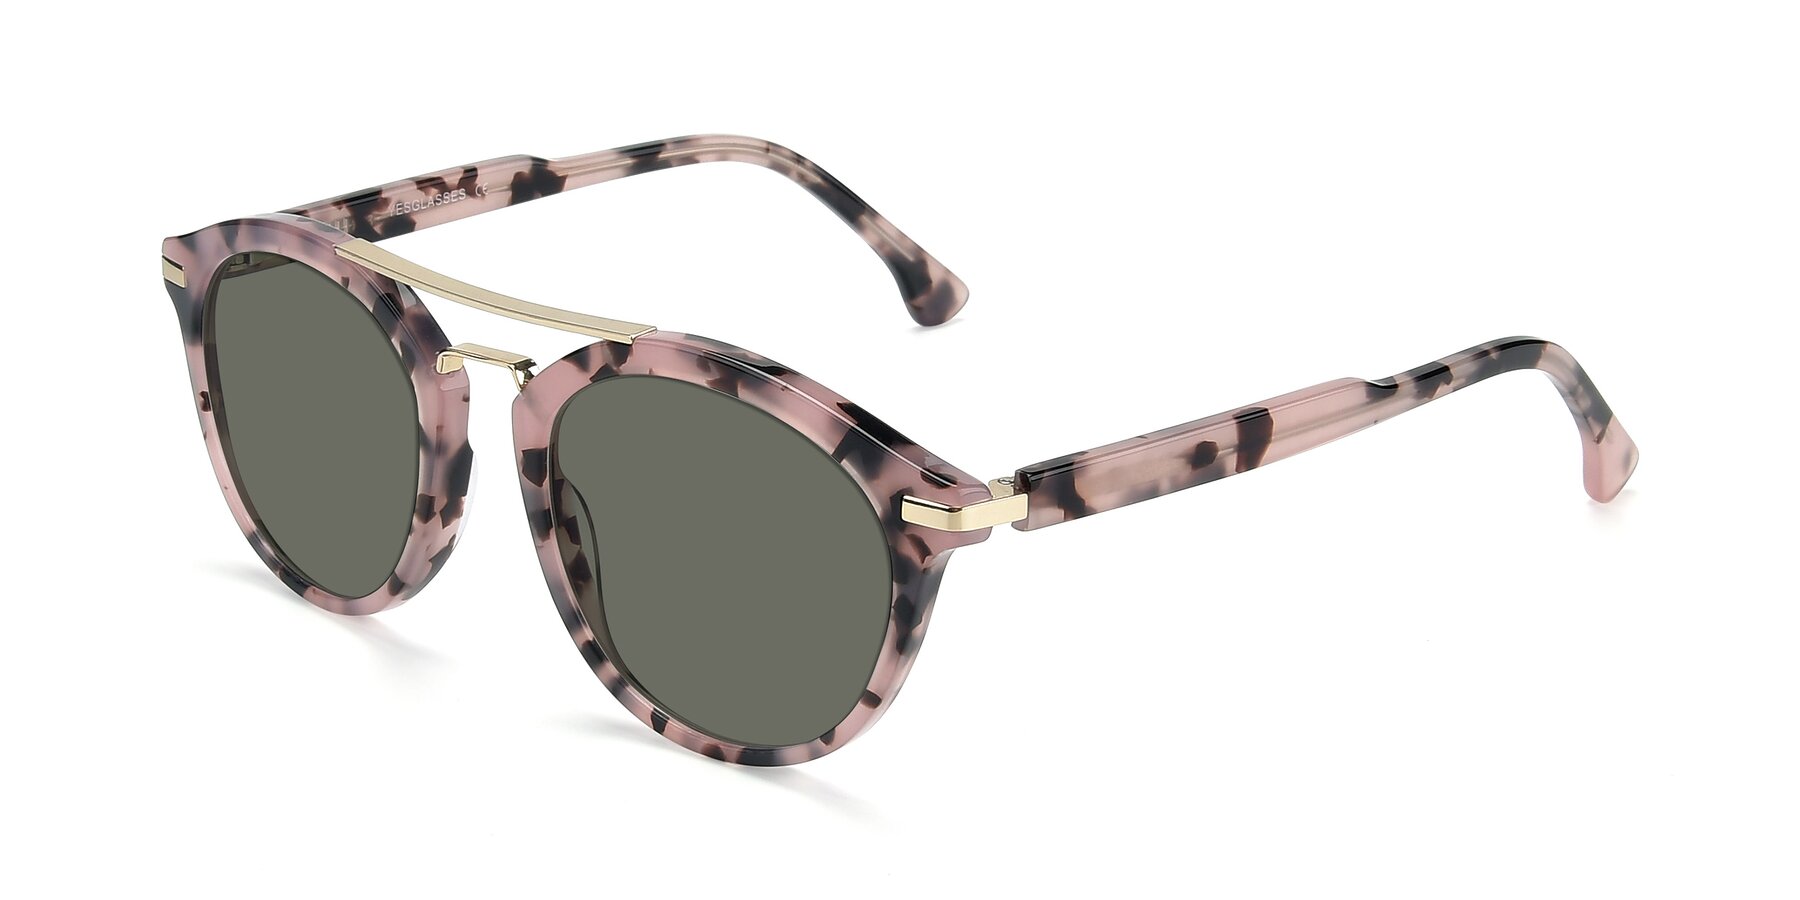 Angle of 17236 in Havana Floral-Gold with Gray Polarized Lenses